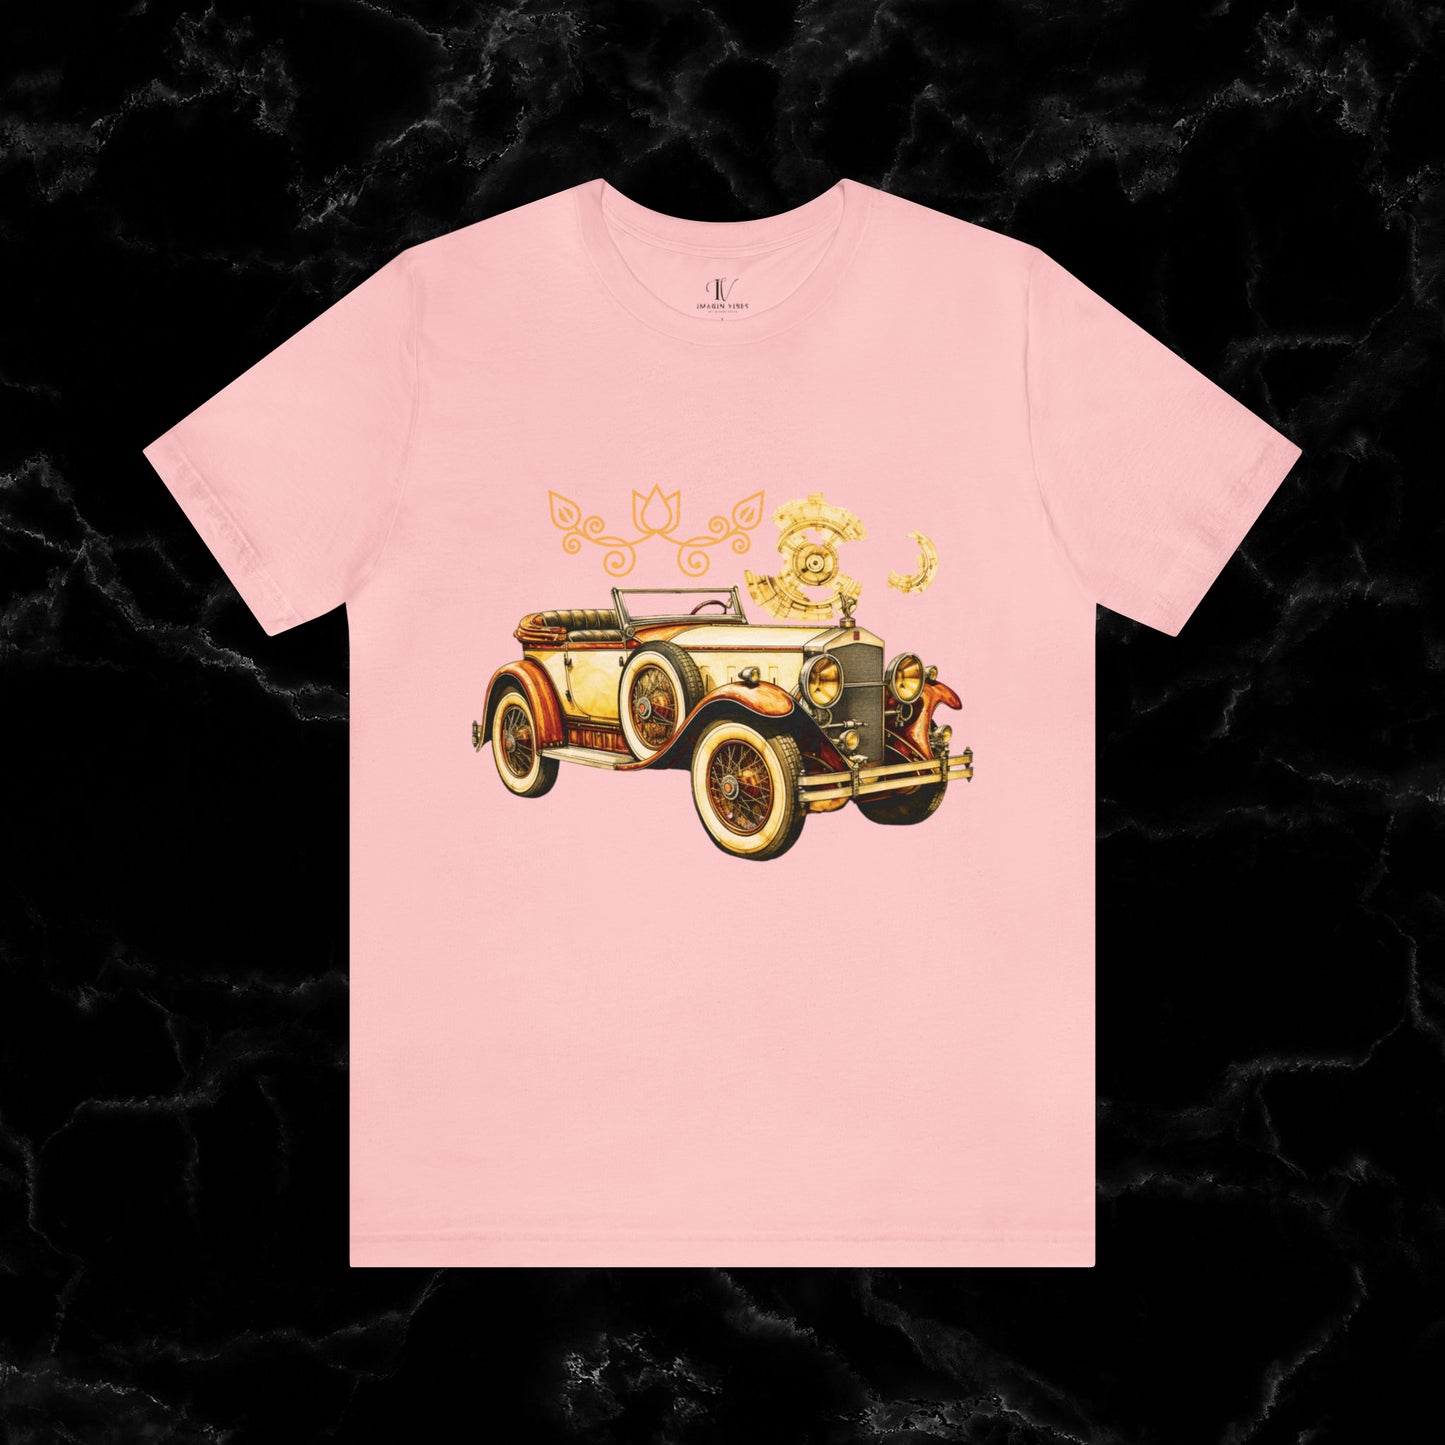 Vintage Car Enthusiast T-Shirt - Classic Wheels and Timeless Appeal for Automotive Enthusiast T-Shirt Pink S 